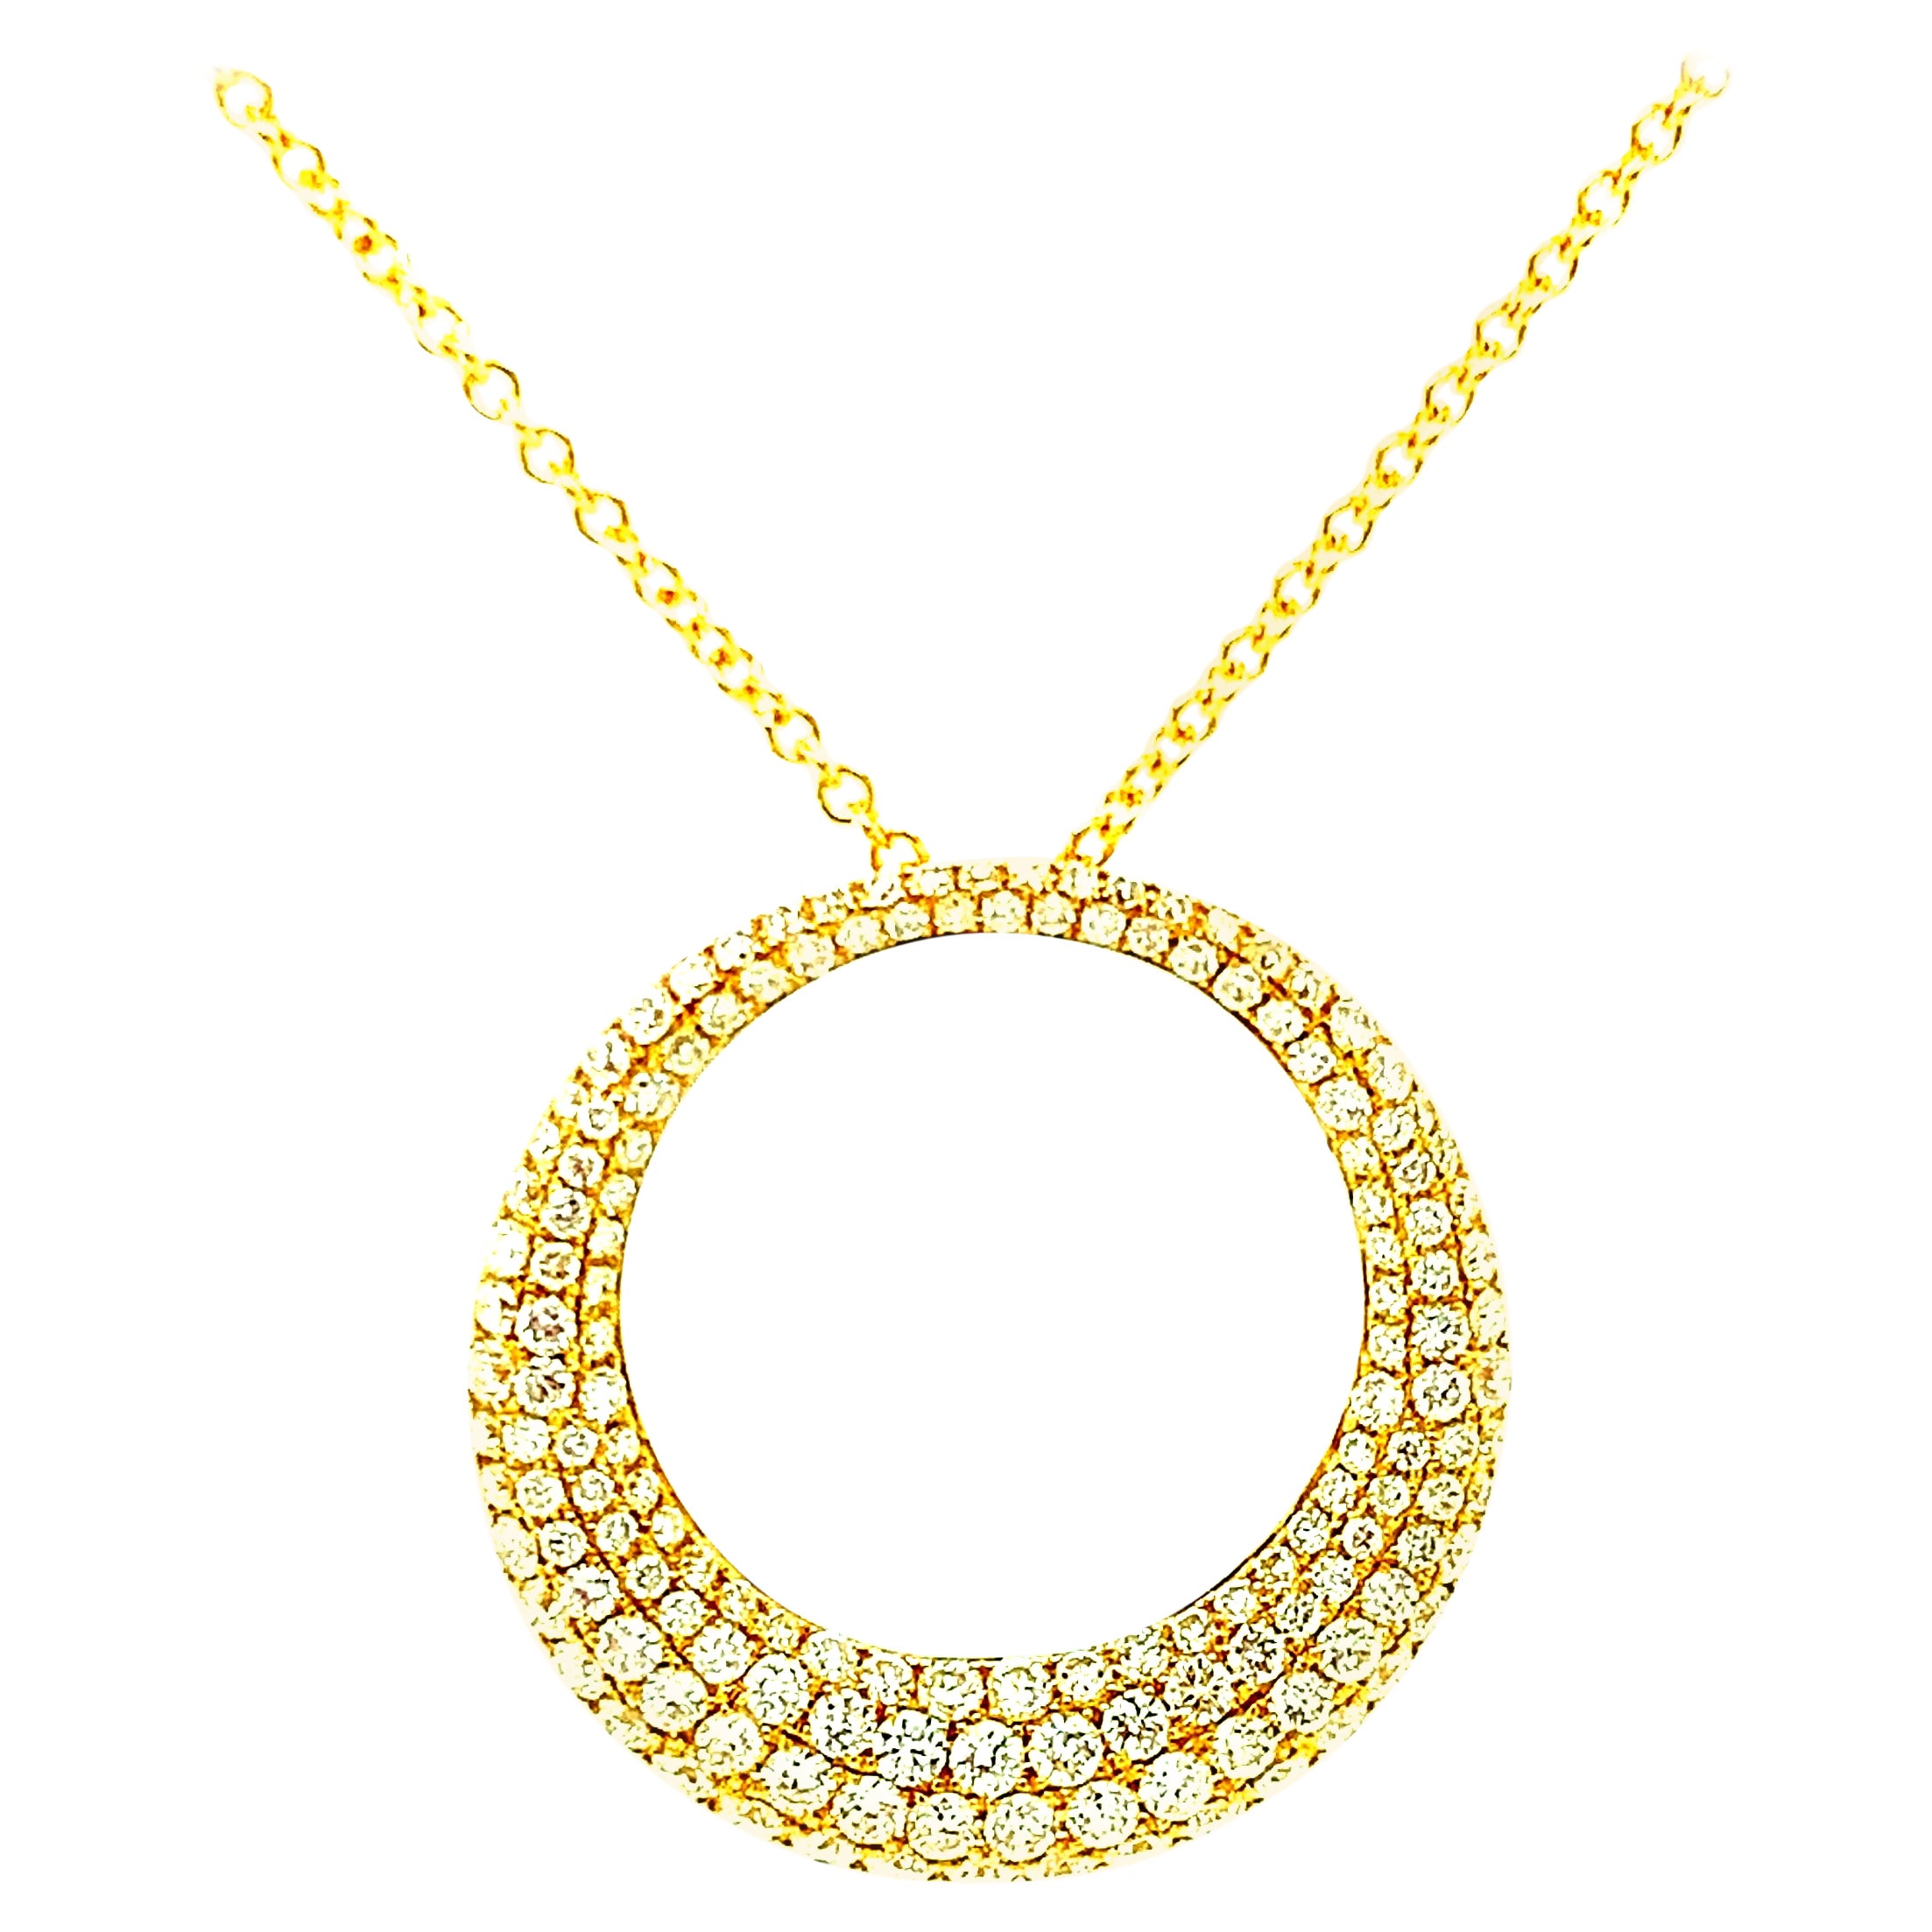 Diamond Pave and 18k Yellow Gold "O" Slide Necklace, 1.66 Carats Total  For Sale